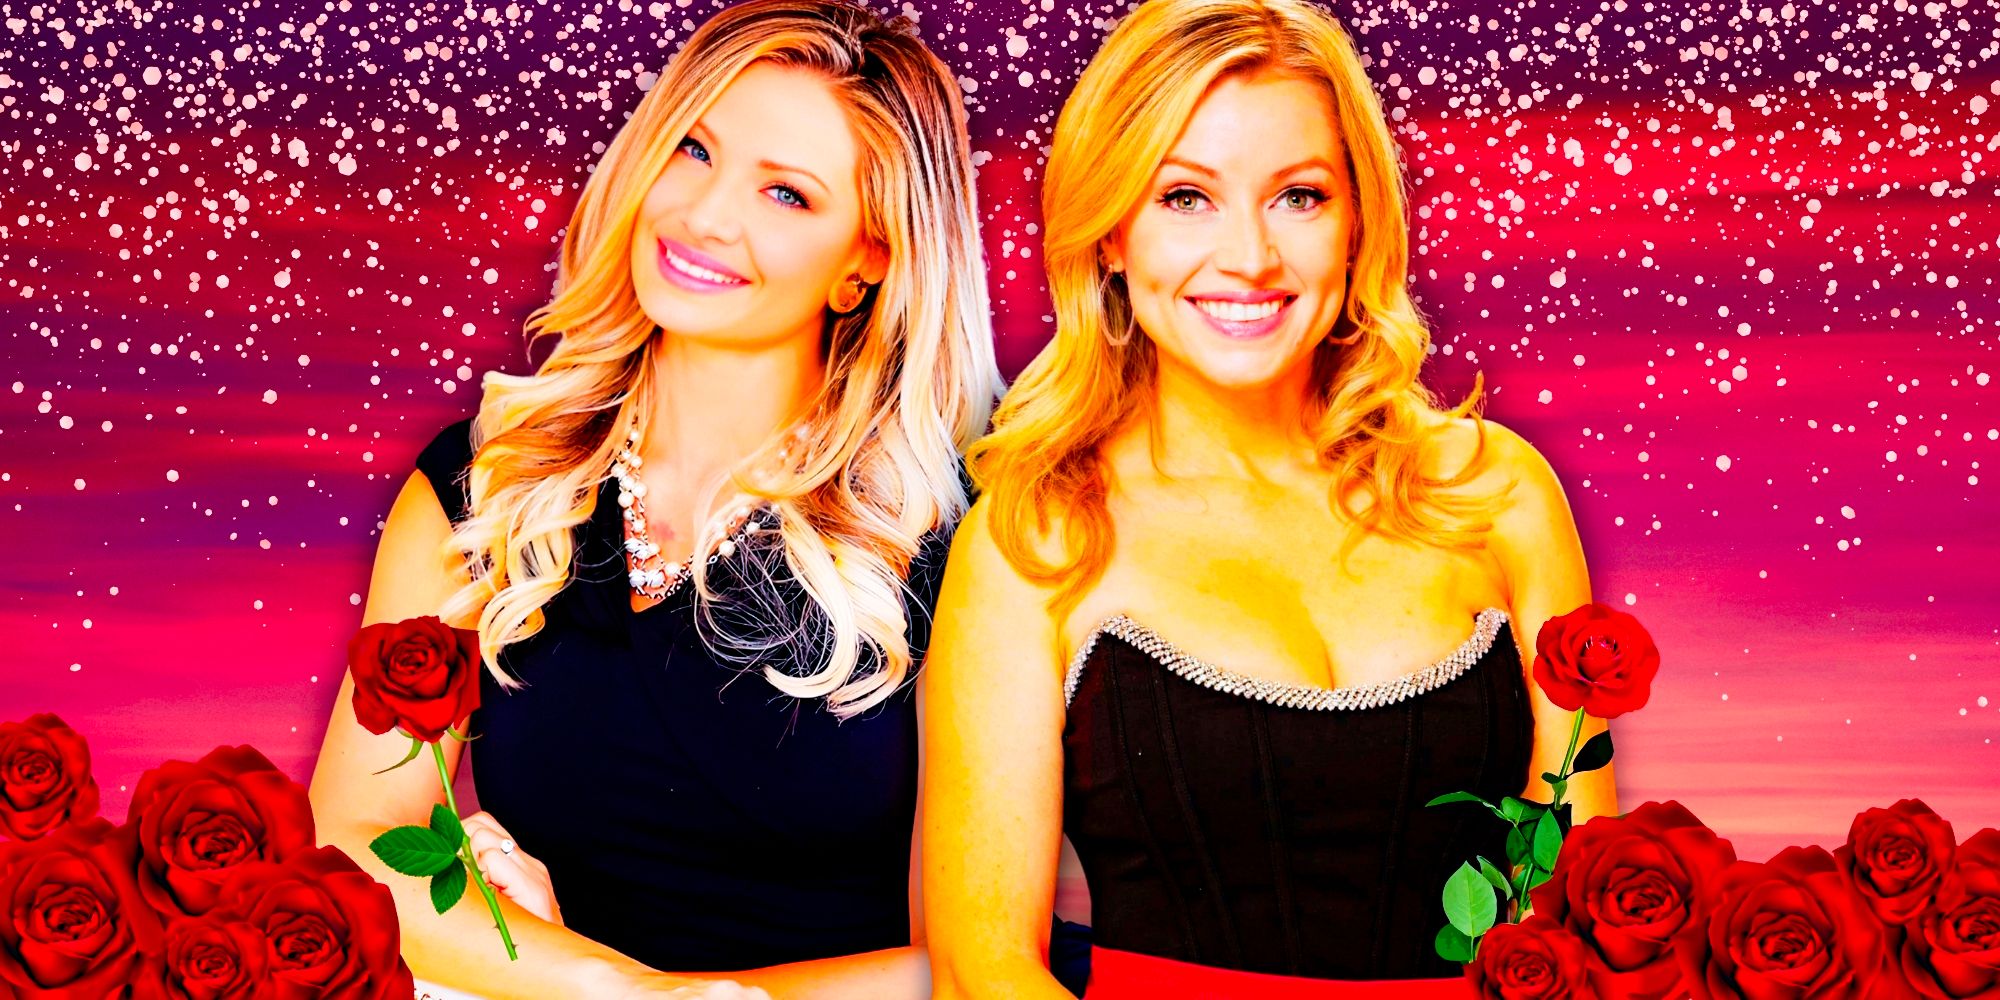 Big Brother players Britney Haynes and Janelle Pierzina with red roses